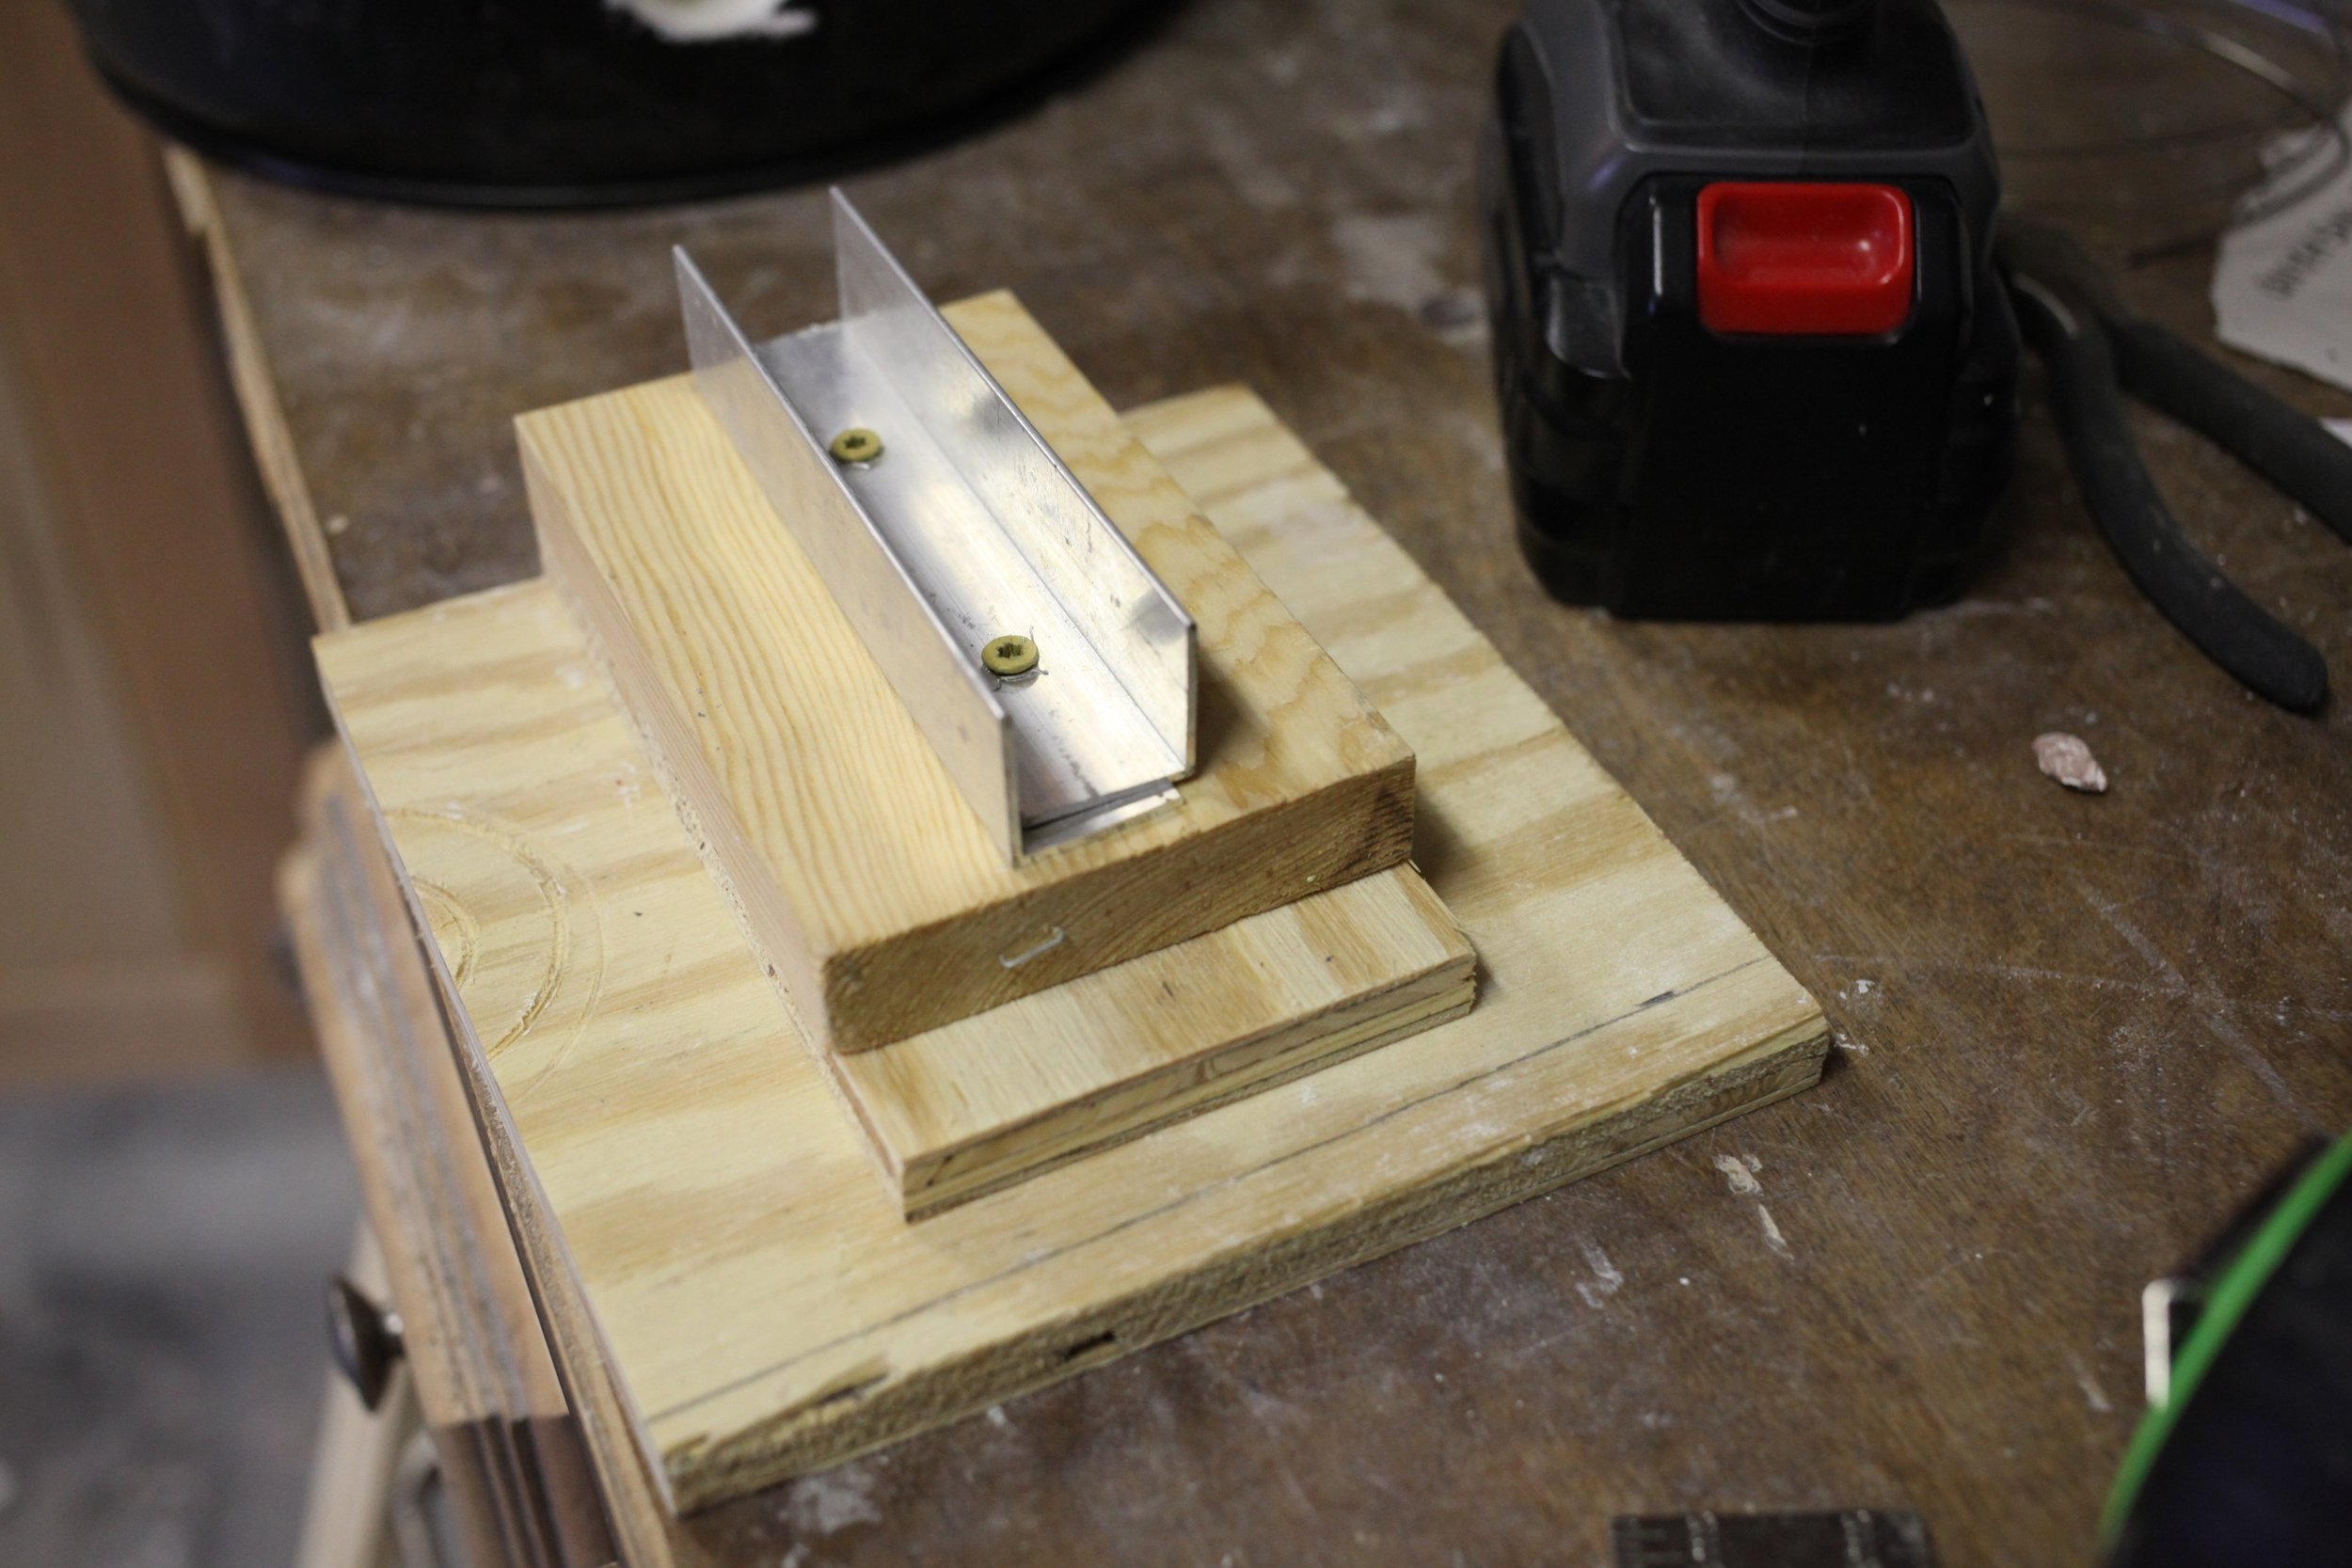  A wood and metal jig to hold the burner. I would  not  recommend using any wood for this.&nbsp; 